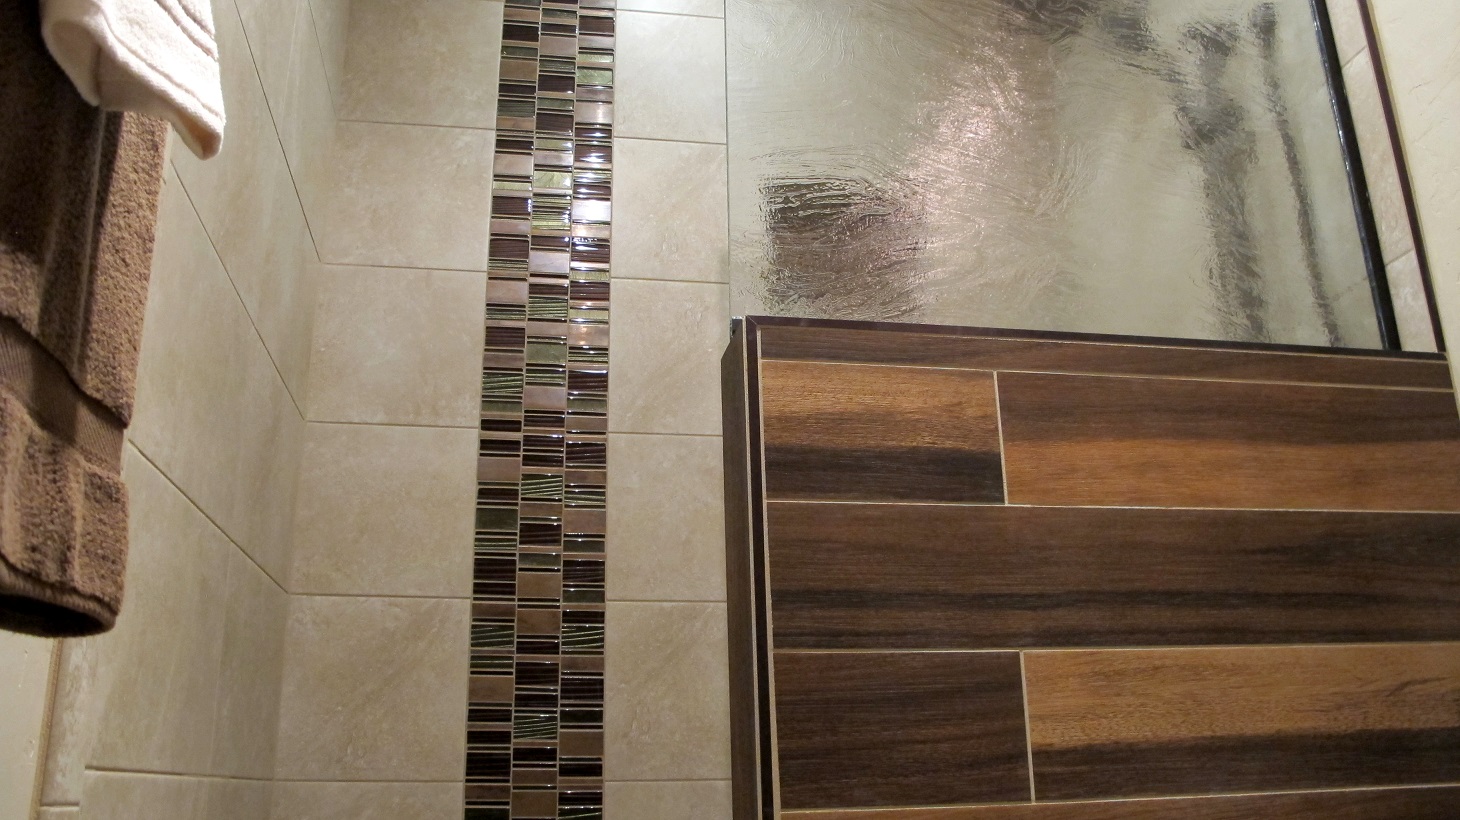 guest bathroom walk in shower shower pony wall glass stainless mosaic tile plank 6x36 Daltile Acacia Valley Ridge Kensington Beige Glazio Corrugated Series Ginger Clove 